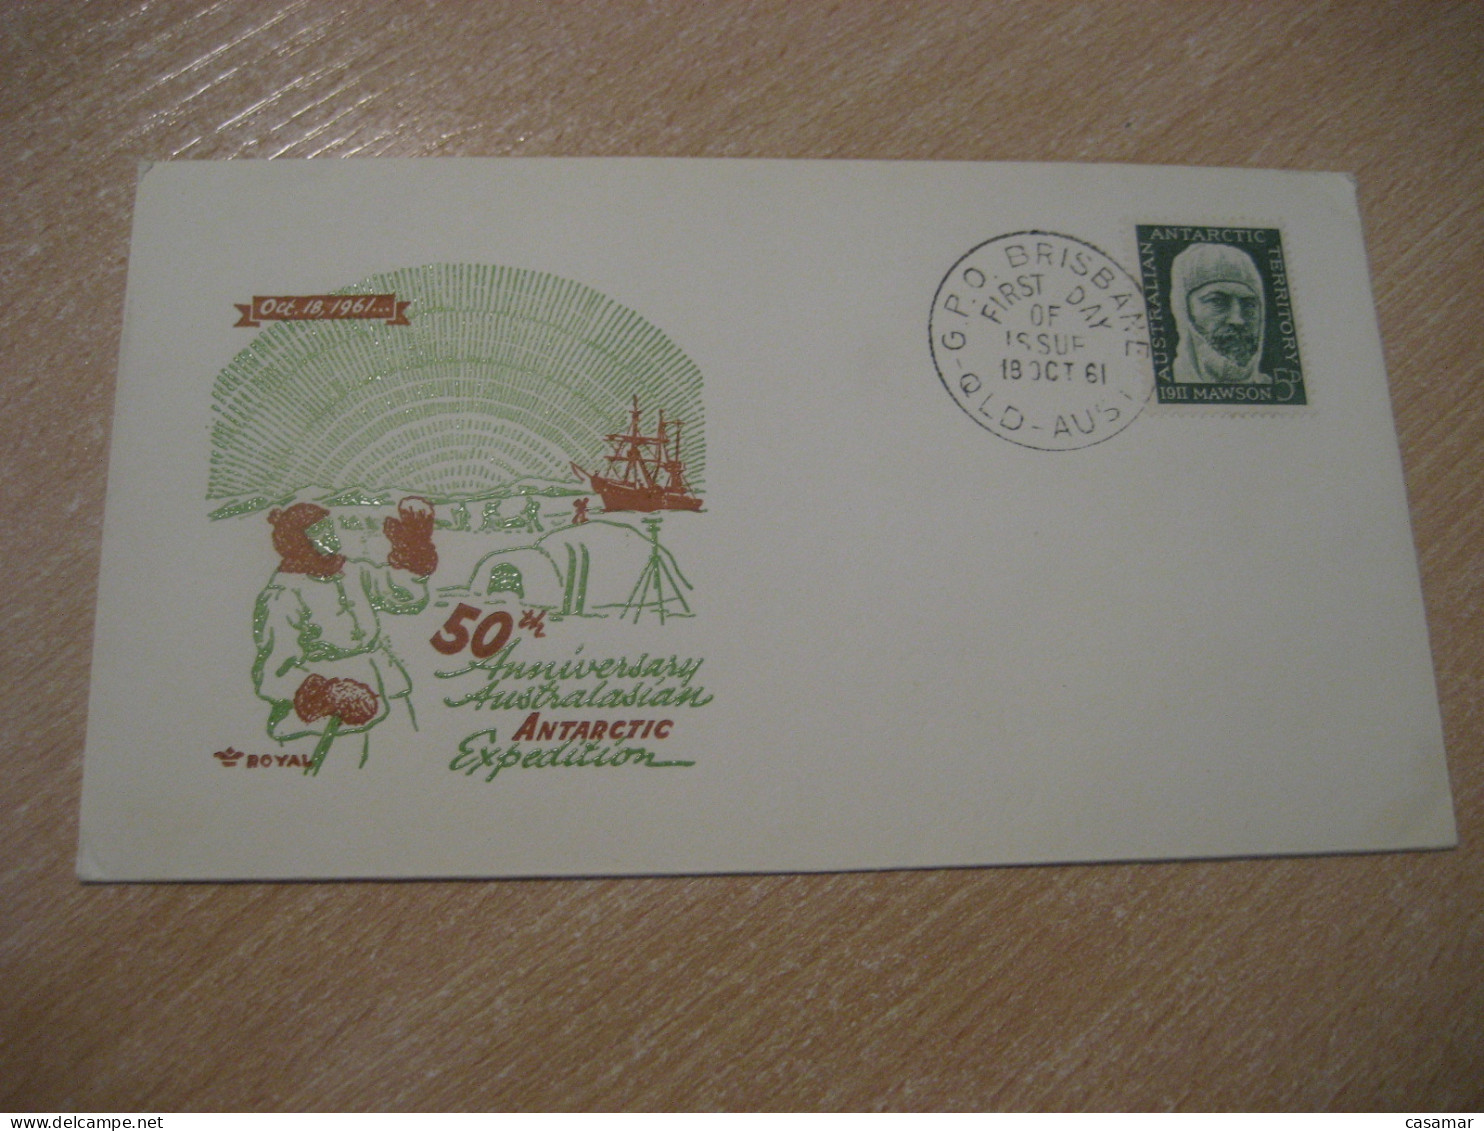 BRISBANE 1961 To Caulfield Mawson FDC Cancel Cover AAT AUSTRALIAN ANTARCTIC TERRITORY A.A.T. Antarctique - Lettres & Documents